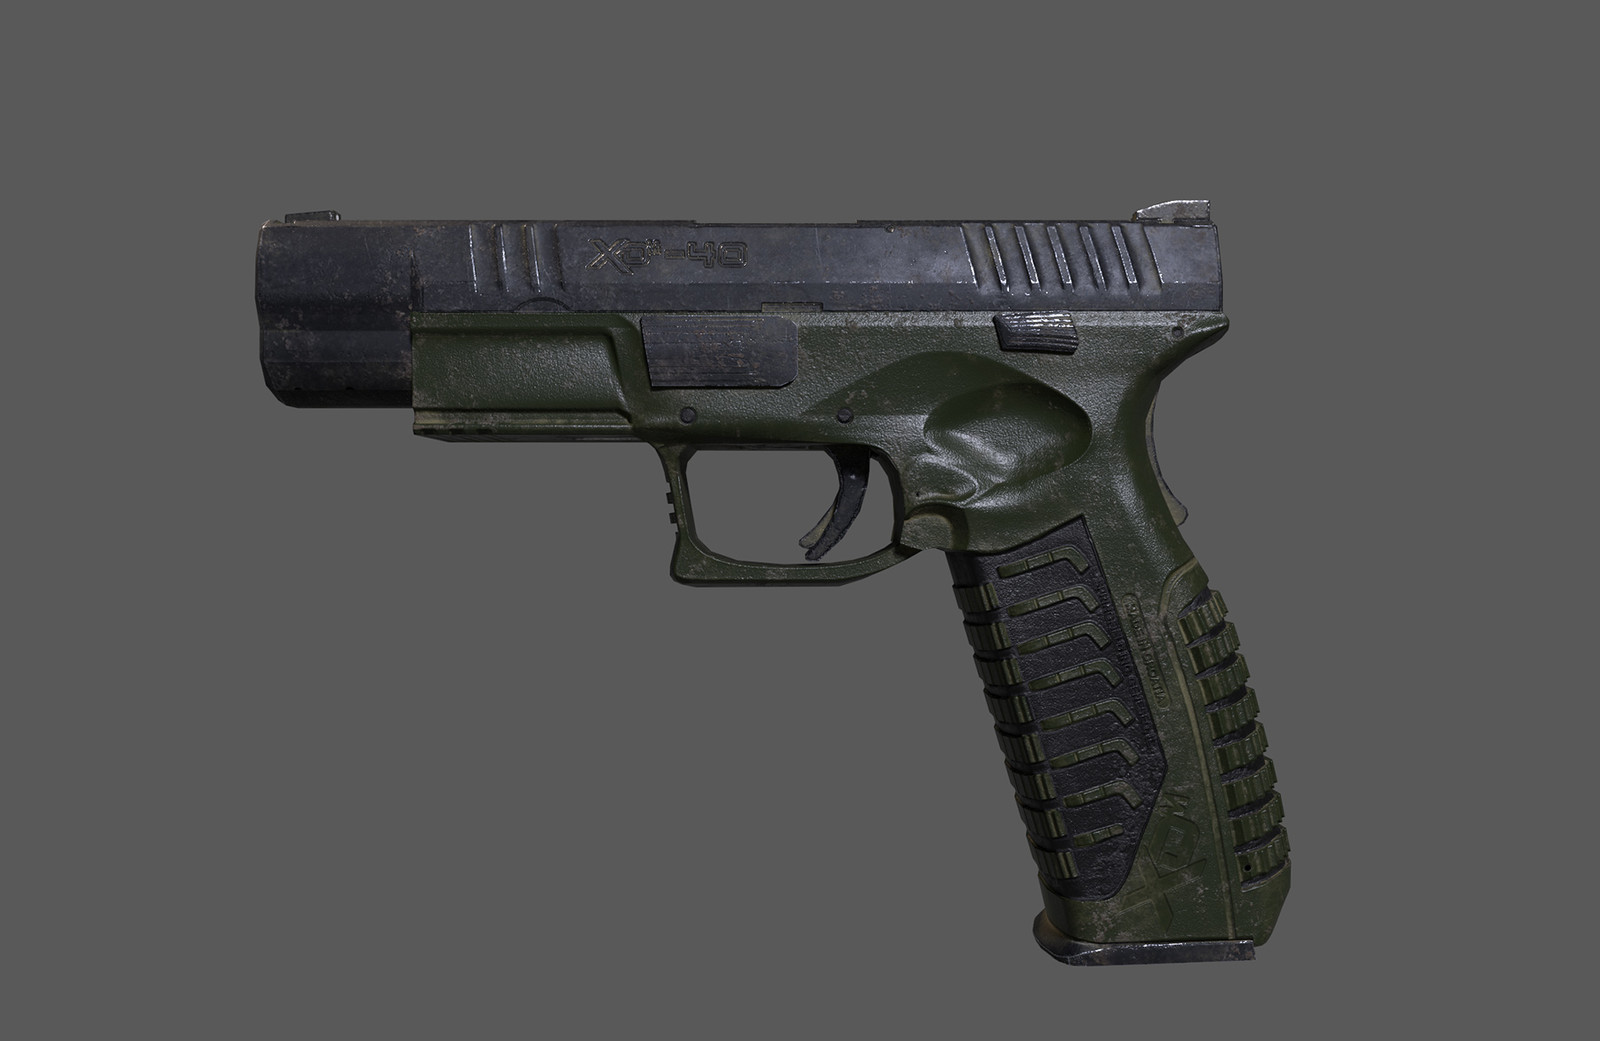 Side profile of low-poly. Created in 3DS Max, boolean assist on handgrips with Z-Brush, and texturing in Substance Painter.